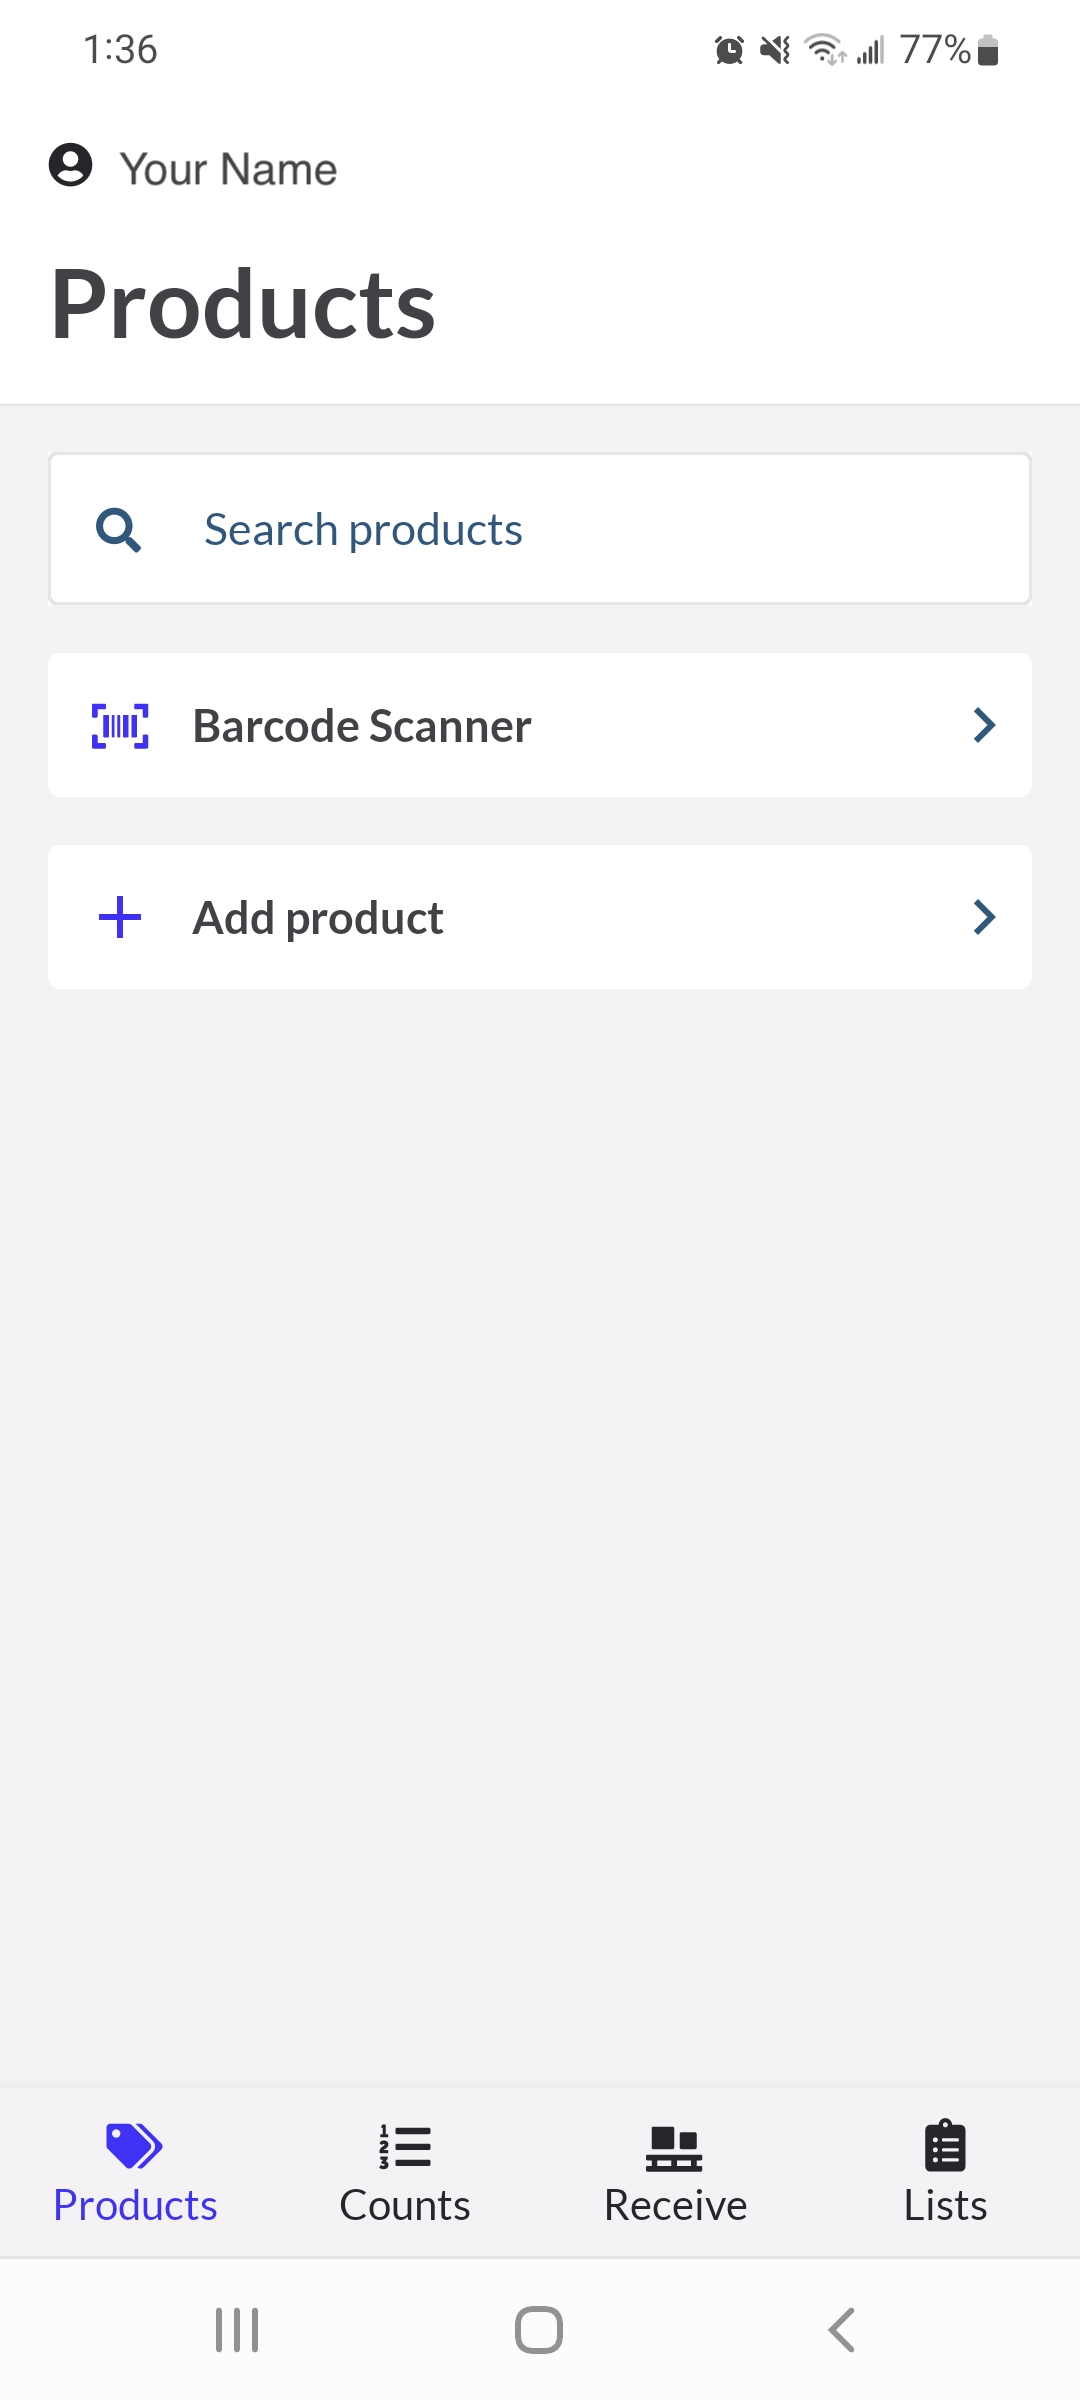 Products page showing the barcode scanner feature under the search bar.